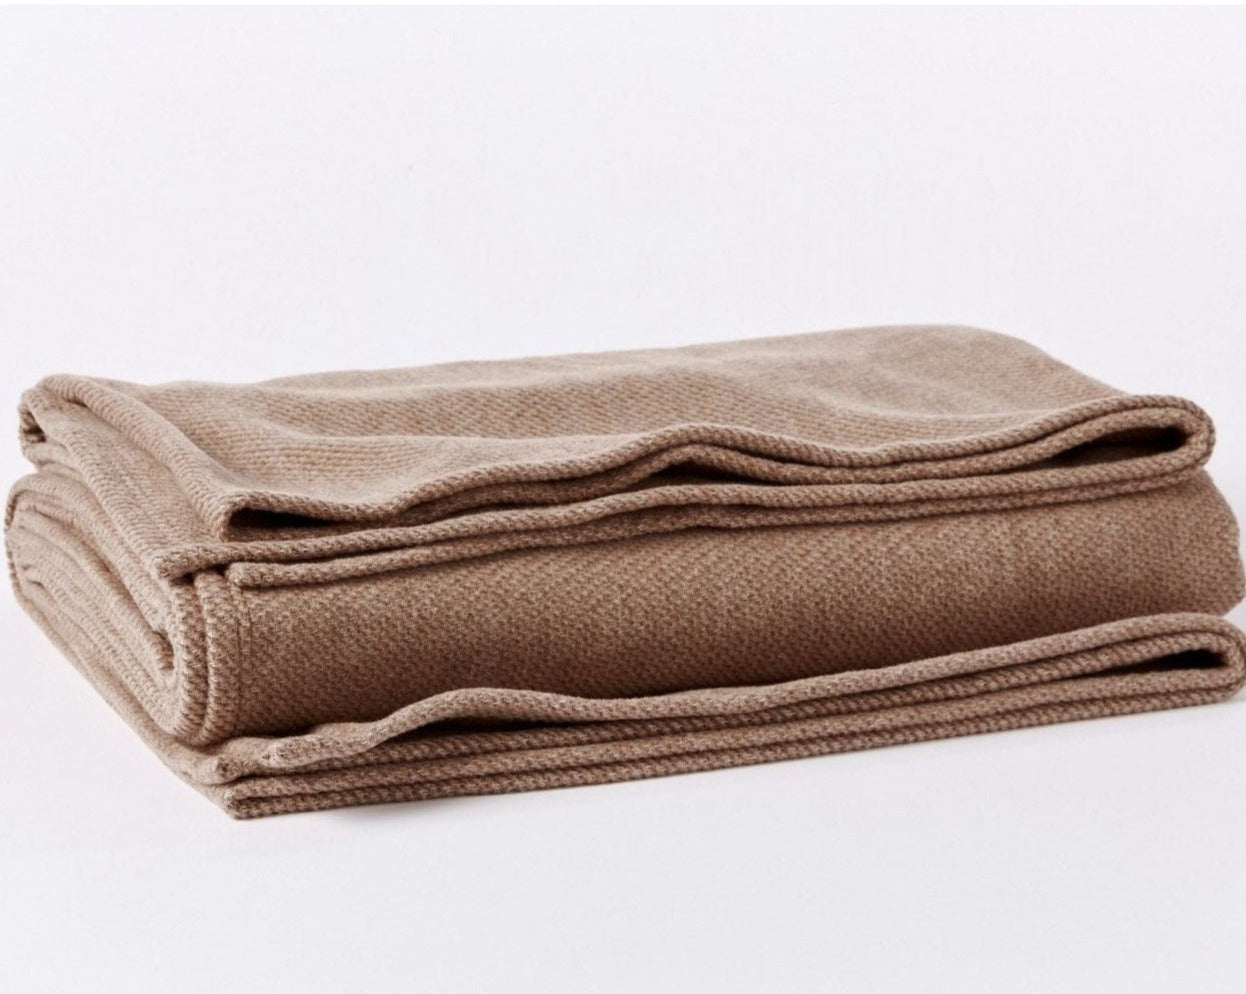 Made from a blend of organic cotton and organic wool, this organic Sequoia blanket offers a soft, cottony feel paired with the warmth of wool.